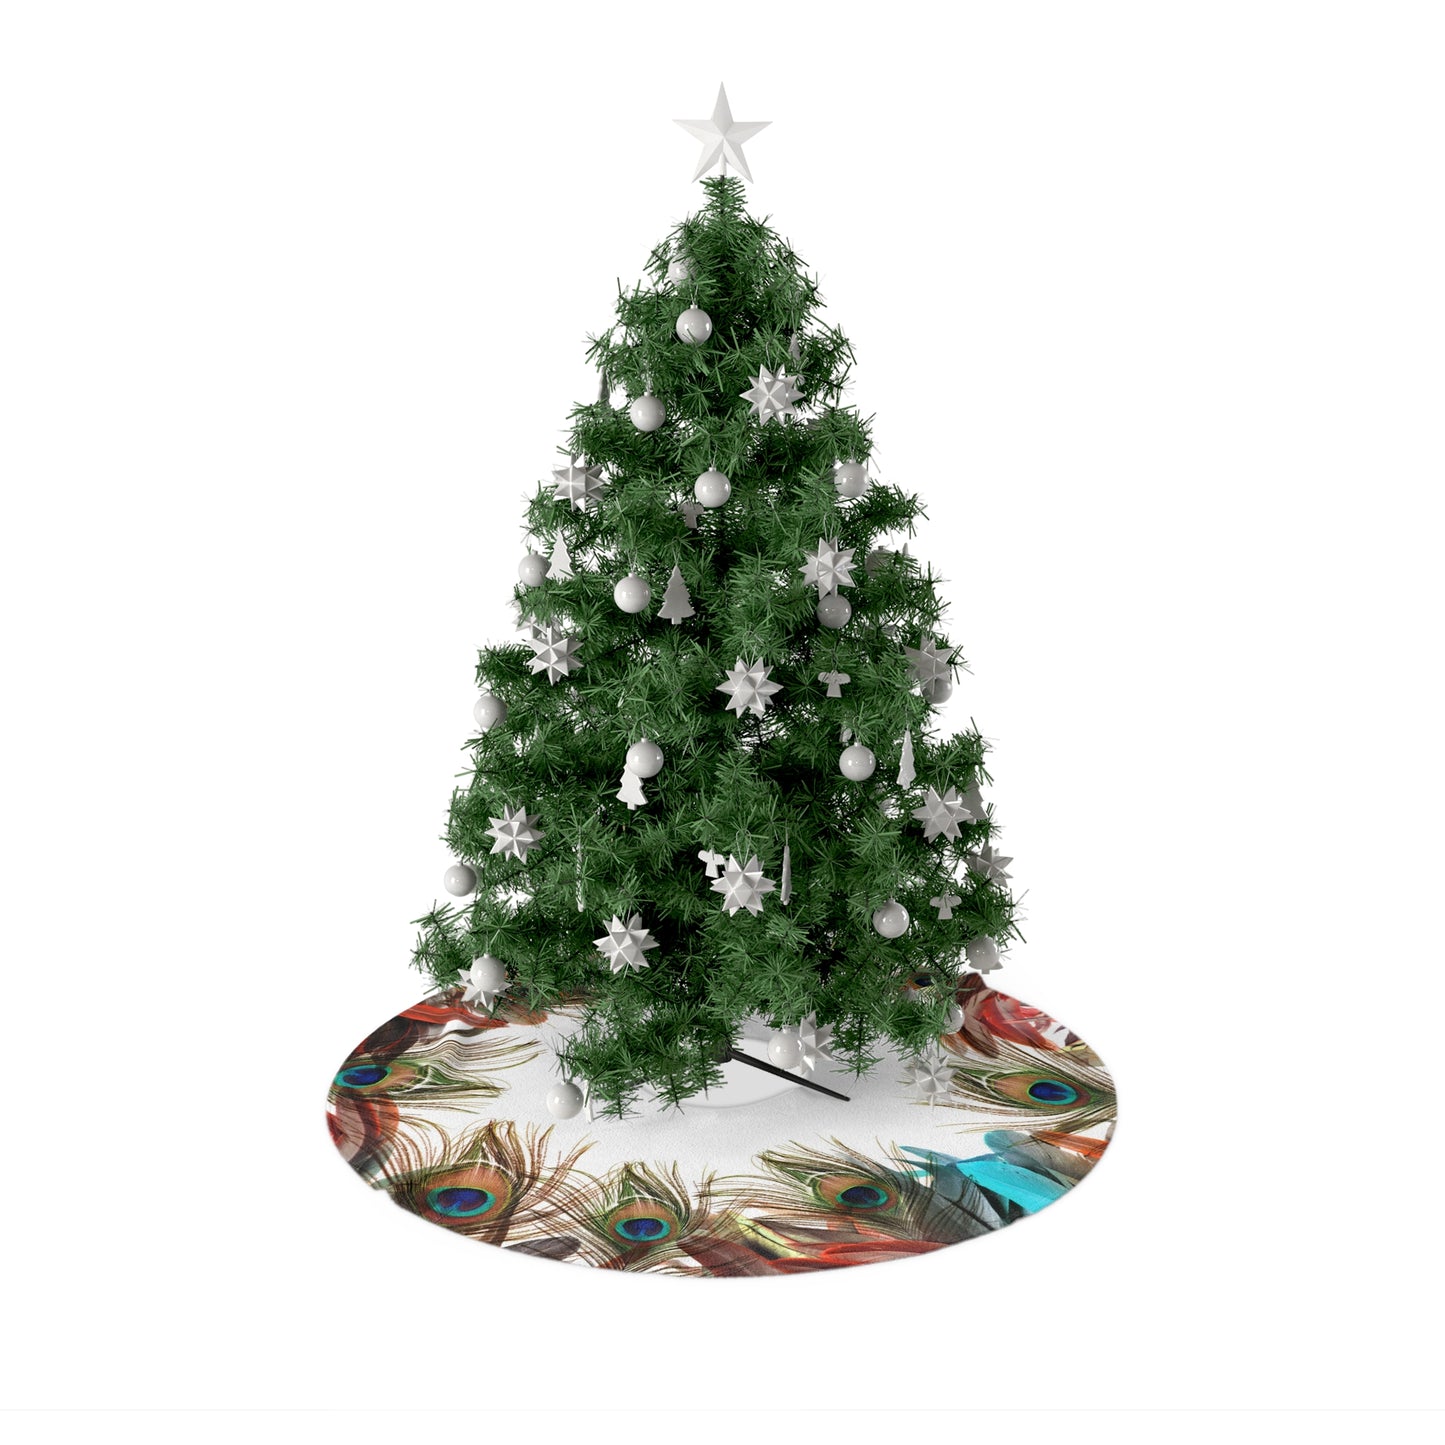 Assorted Feathers Christmas Tree Skirts